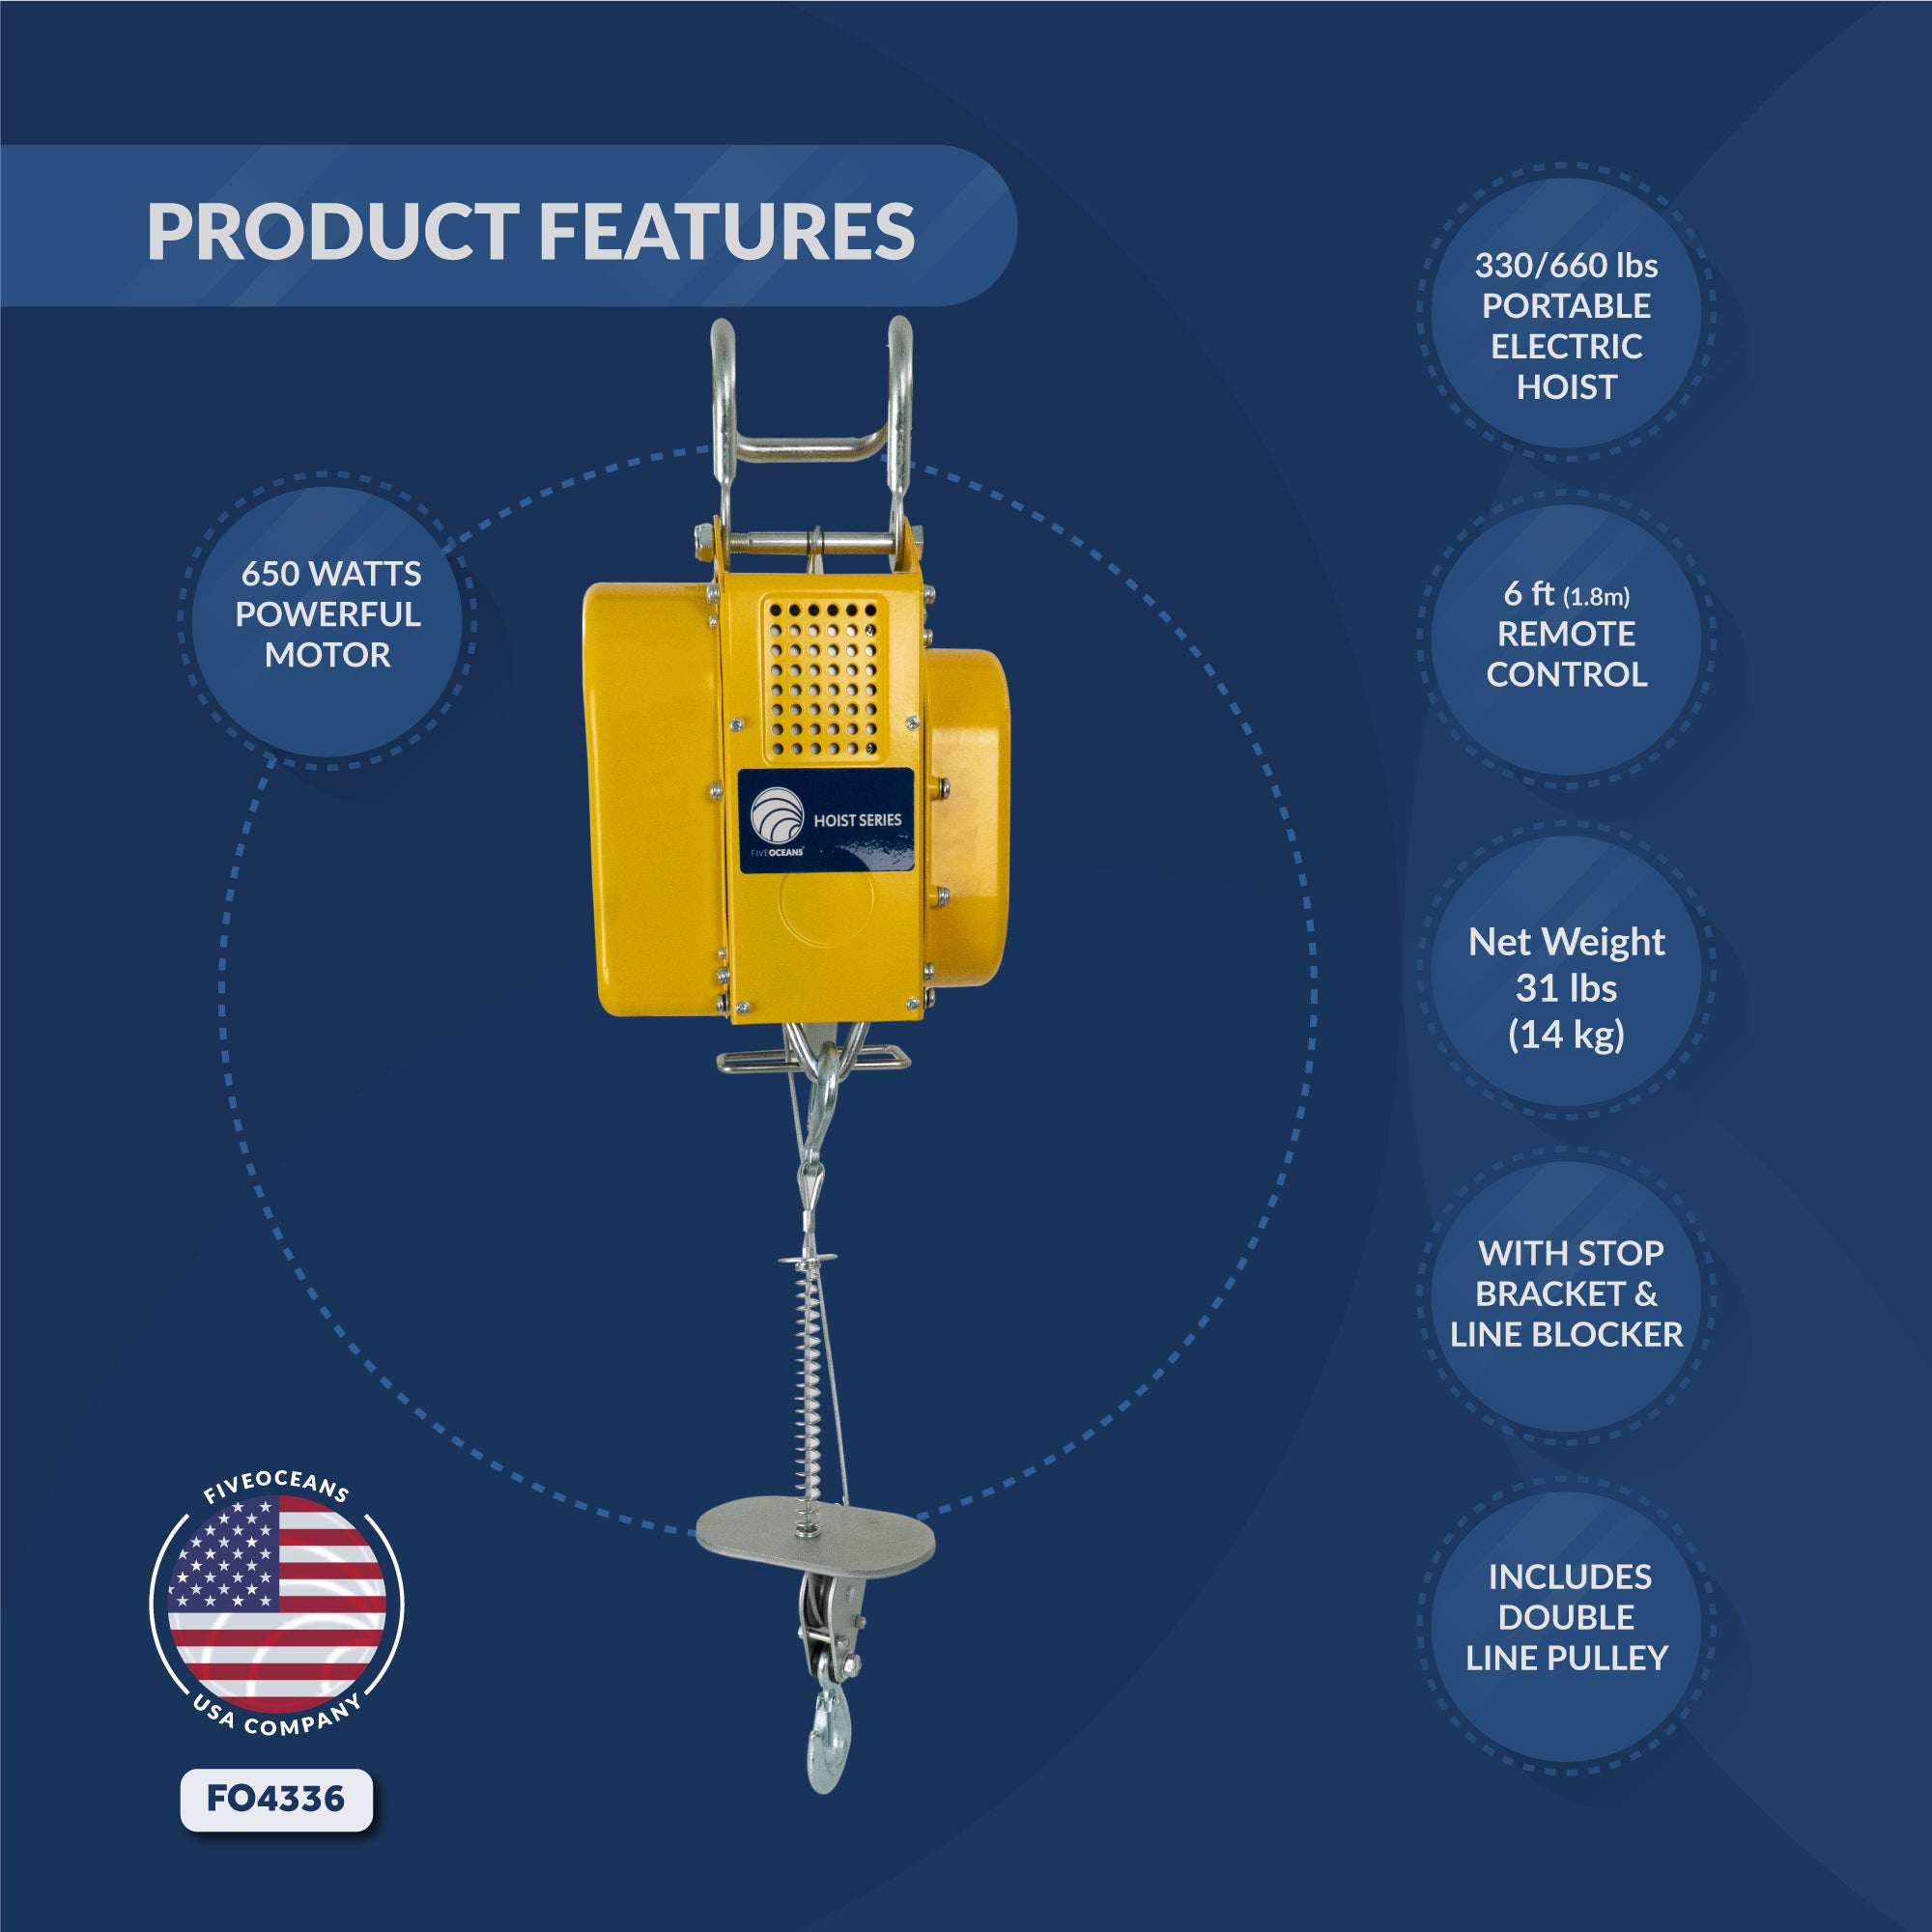 Portable Electric Hoist, Winch, 660 LBS / 300 KG,  6FT Remote Control - FO4336